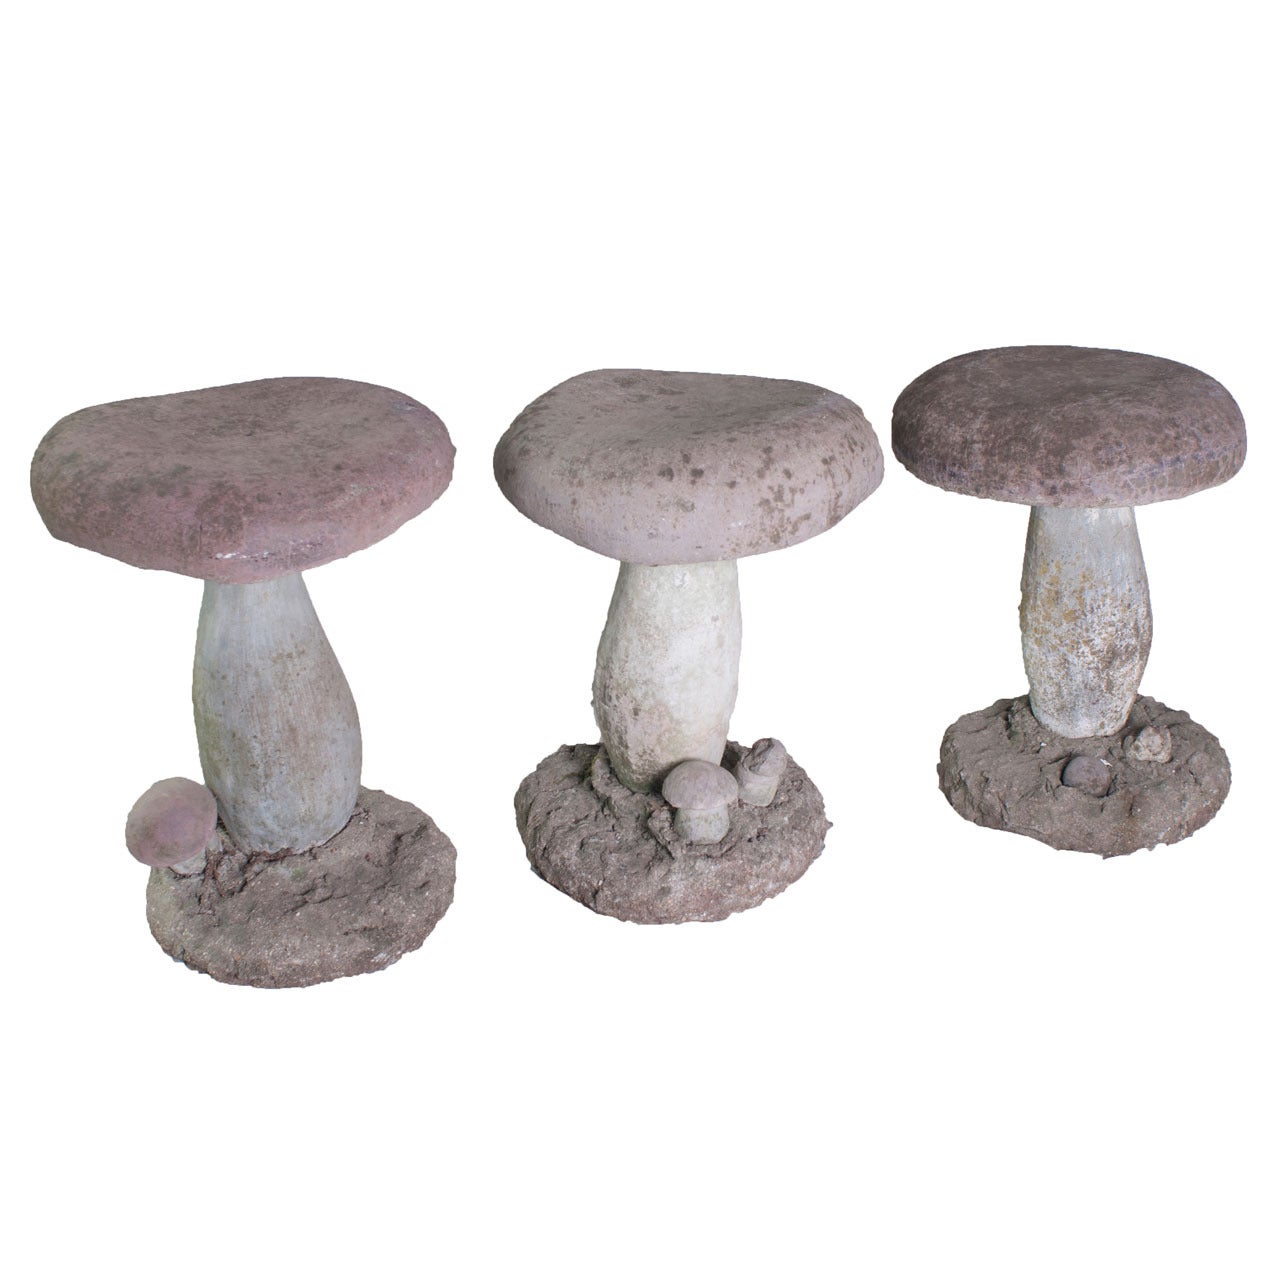 Set of Three Faux Bois Garden Stools in The Form of Mushrooms